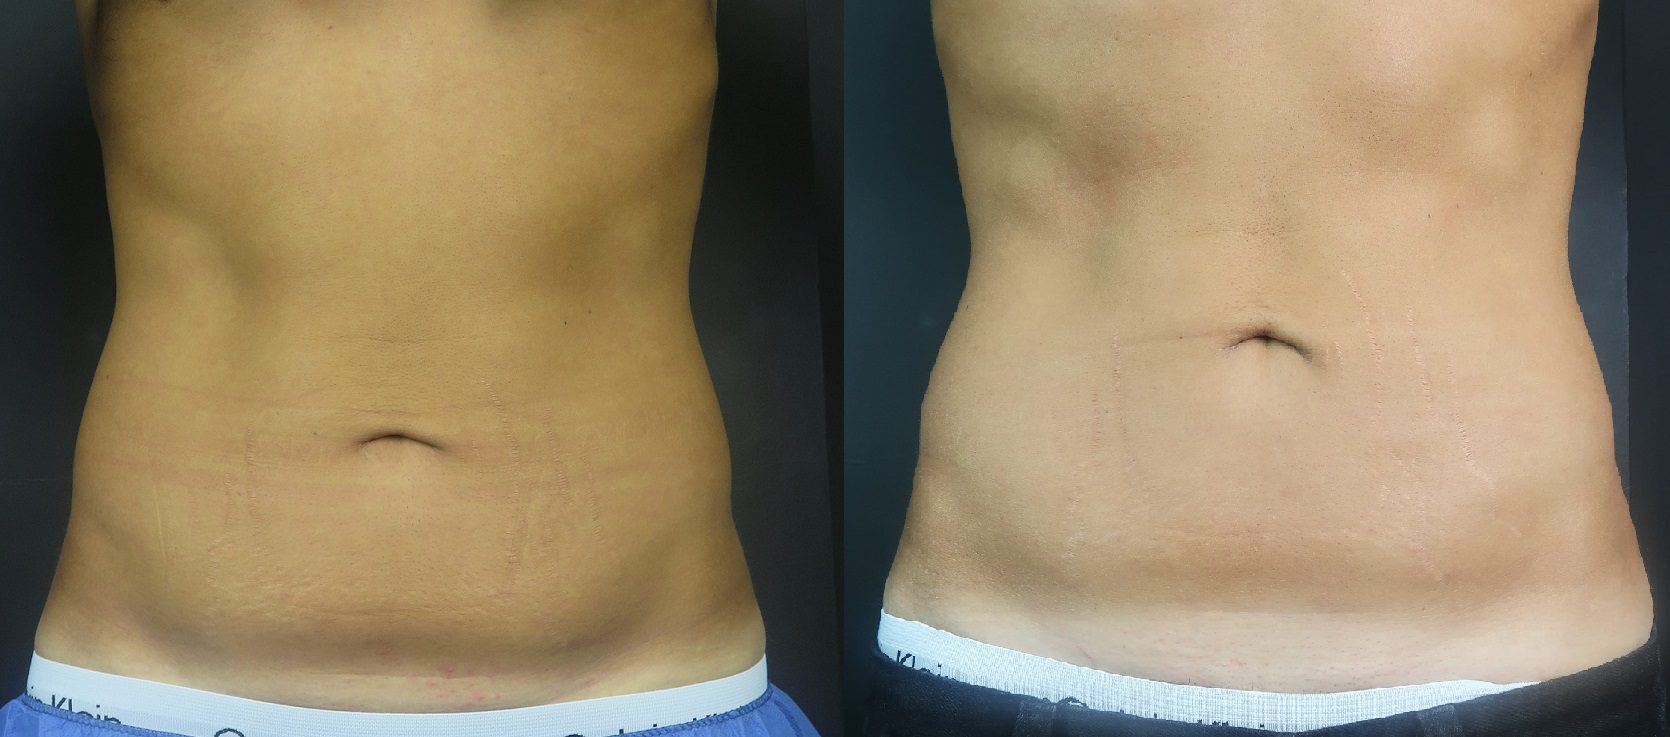 coolsculpting fat freezing stubborn stomach fat before and after